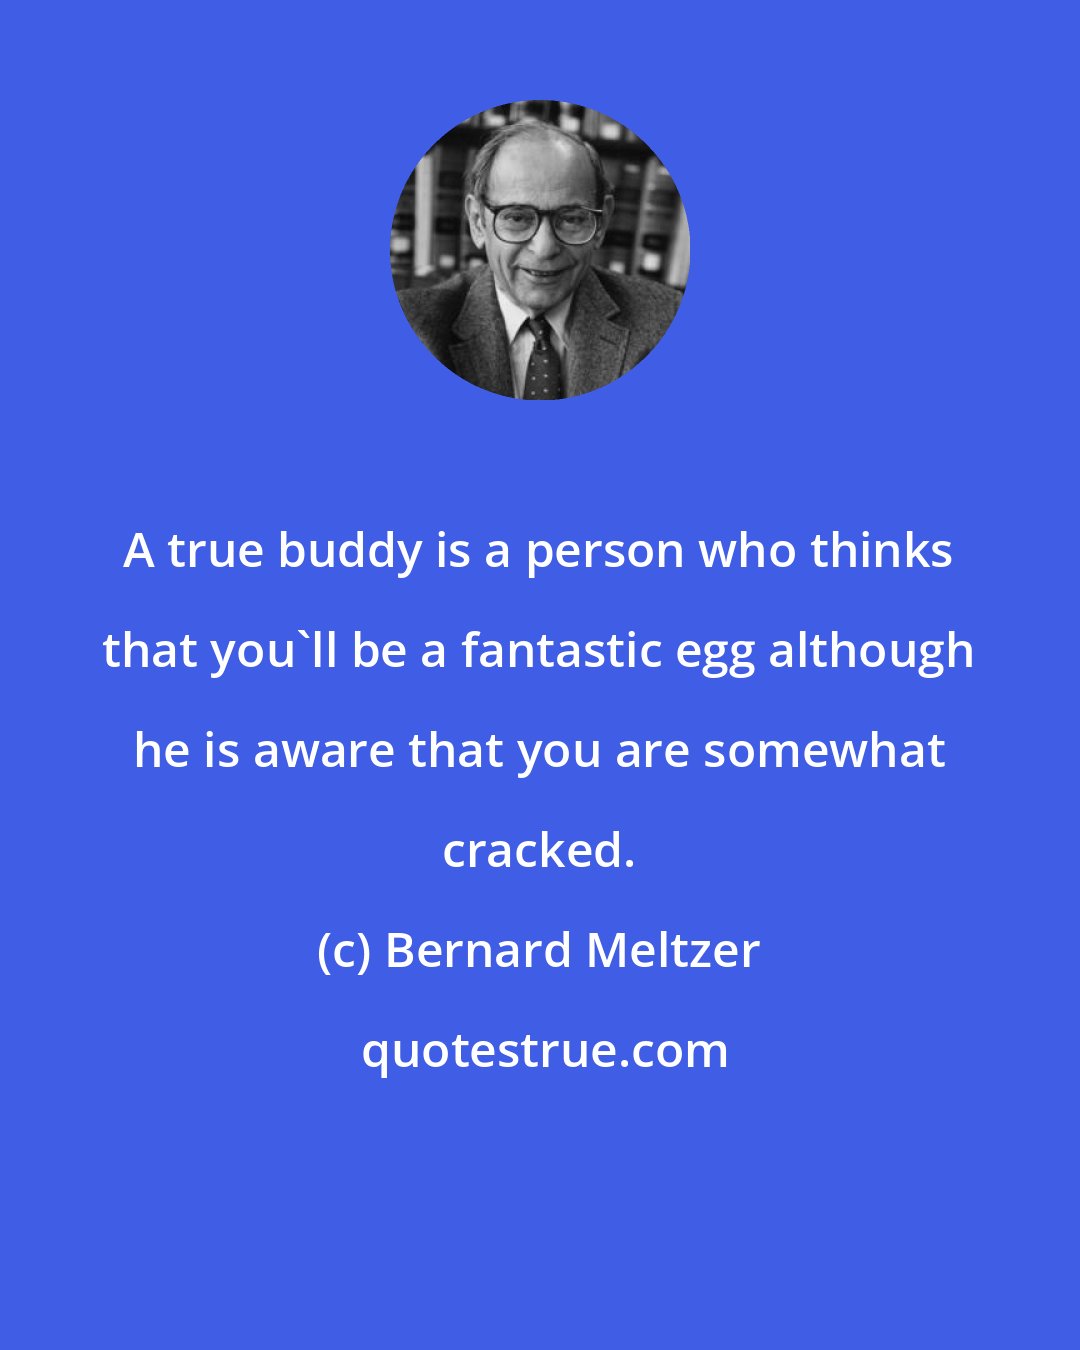 Bernard Meltzer: A true buddy is a person who thinks that you'll be a fantastic egg although he is aware that you are somewhat cracked.